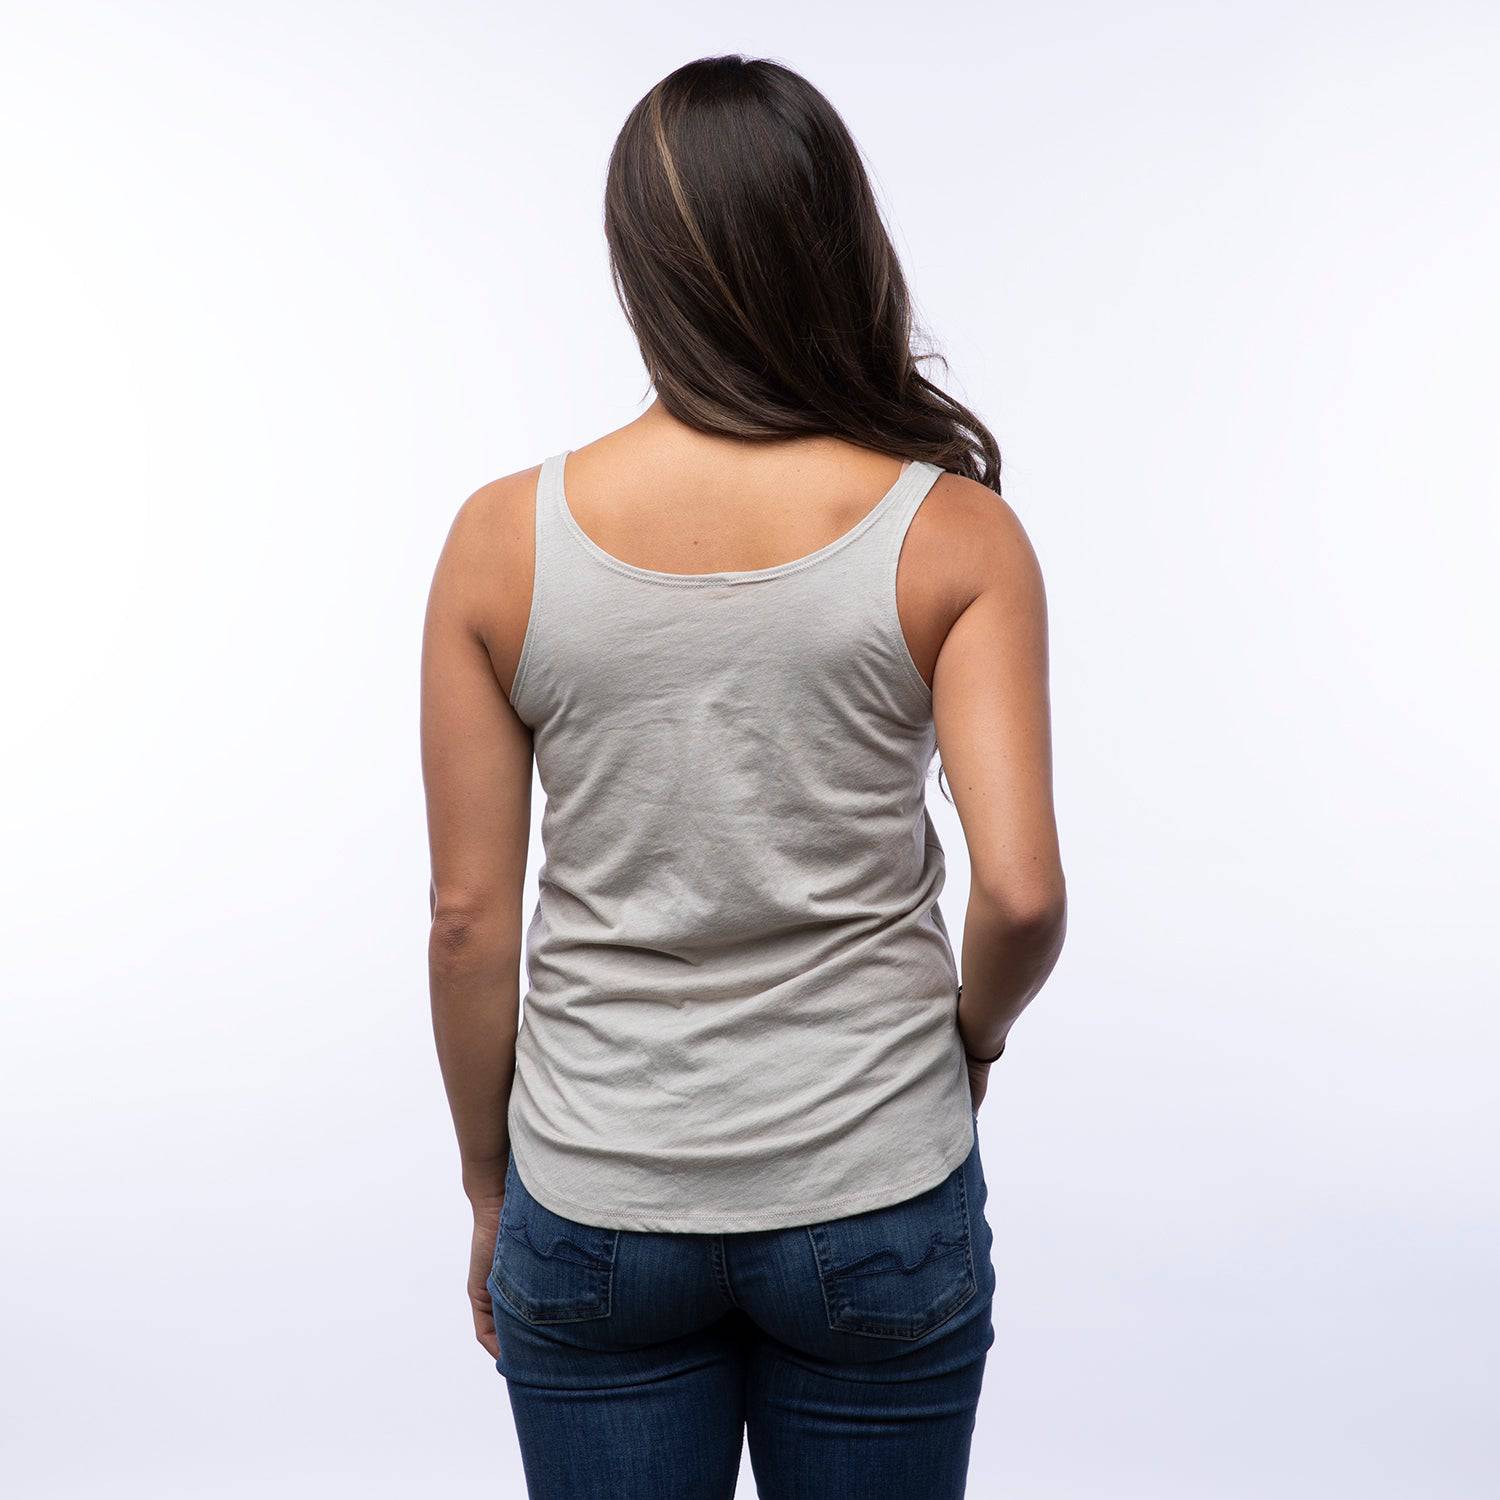 Crow Women's Tank - Counter Couture